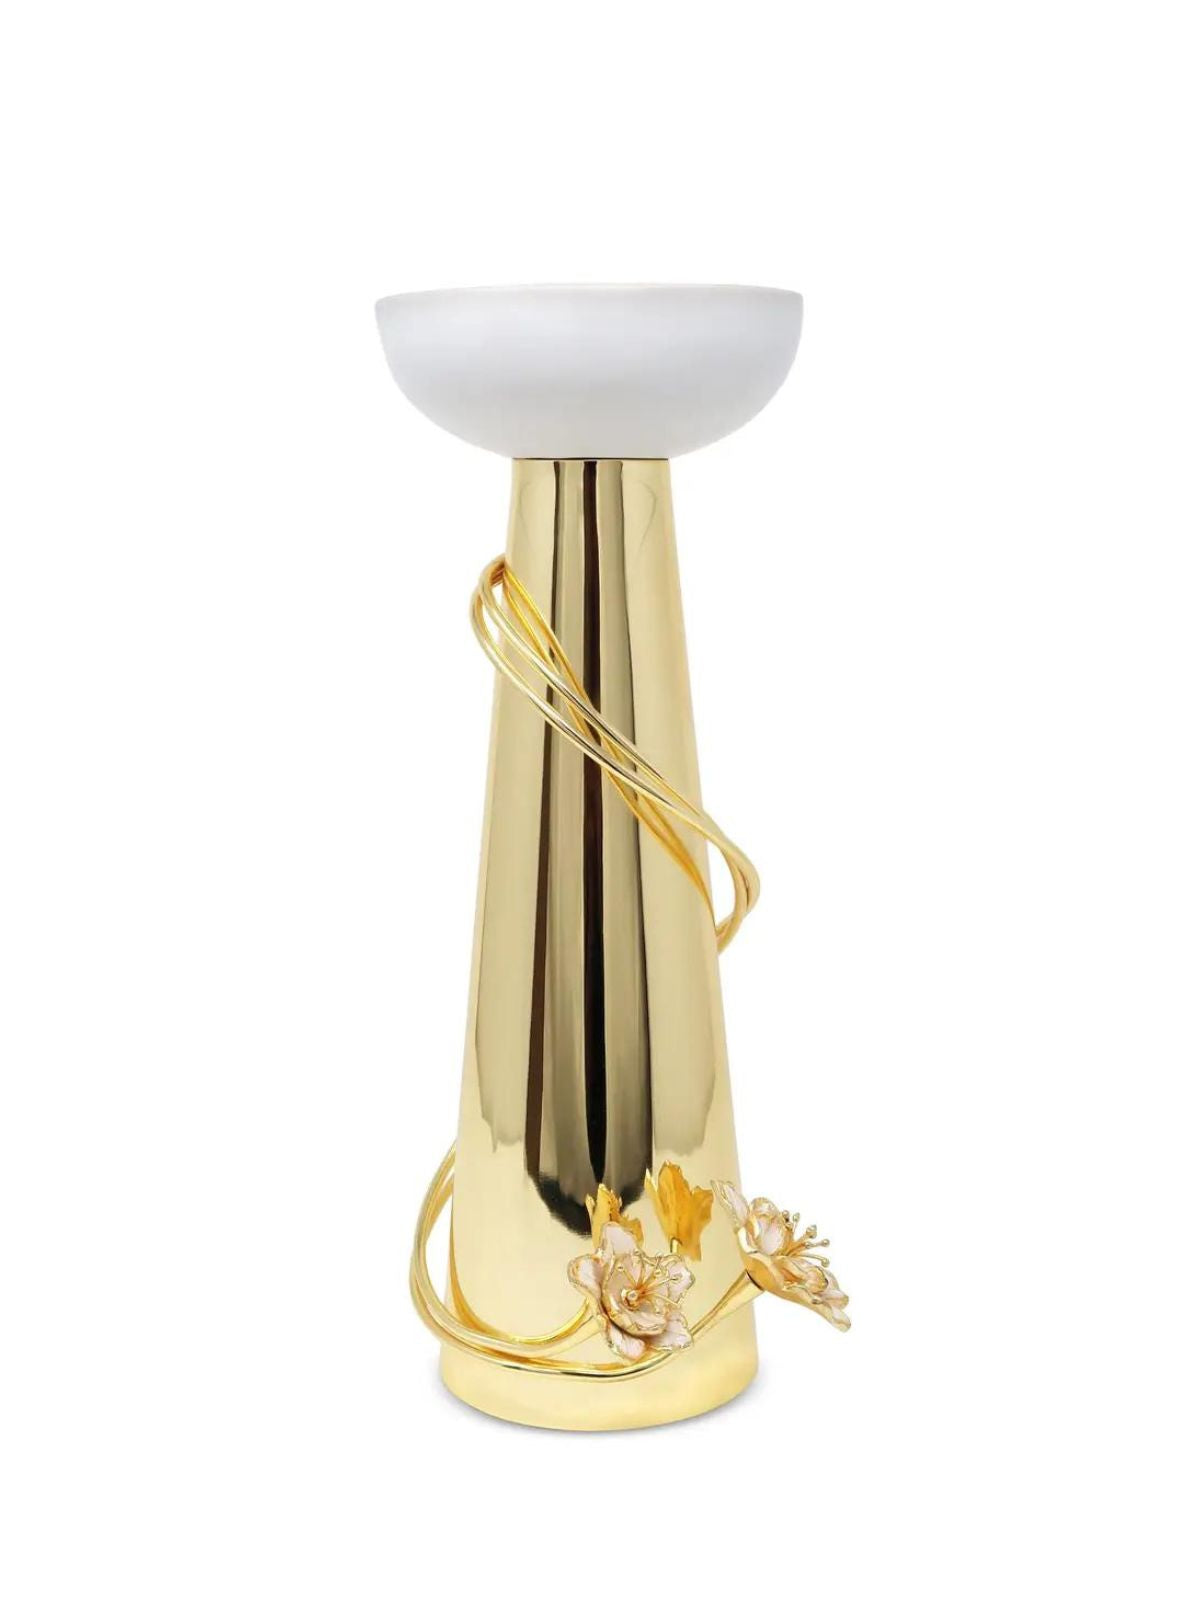 White Porcelain Candlestick Holder on Gold Brass Base with Jewel Flower Details - Luxury Home Decor.